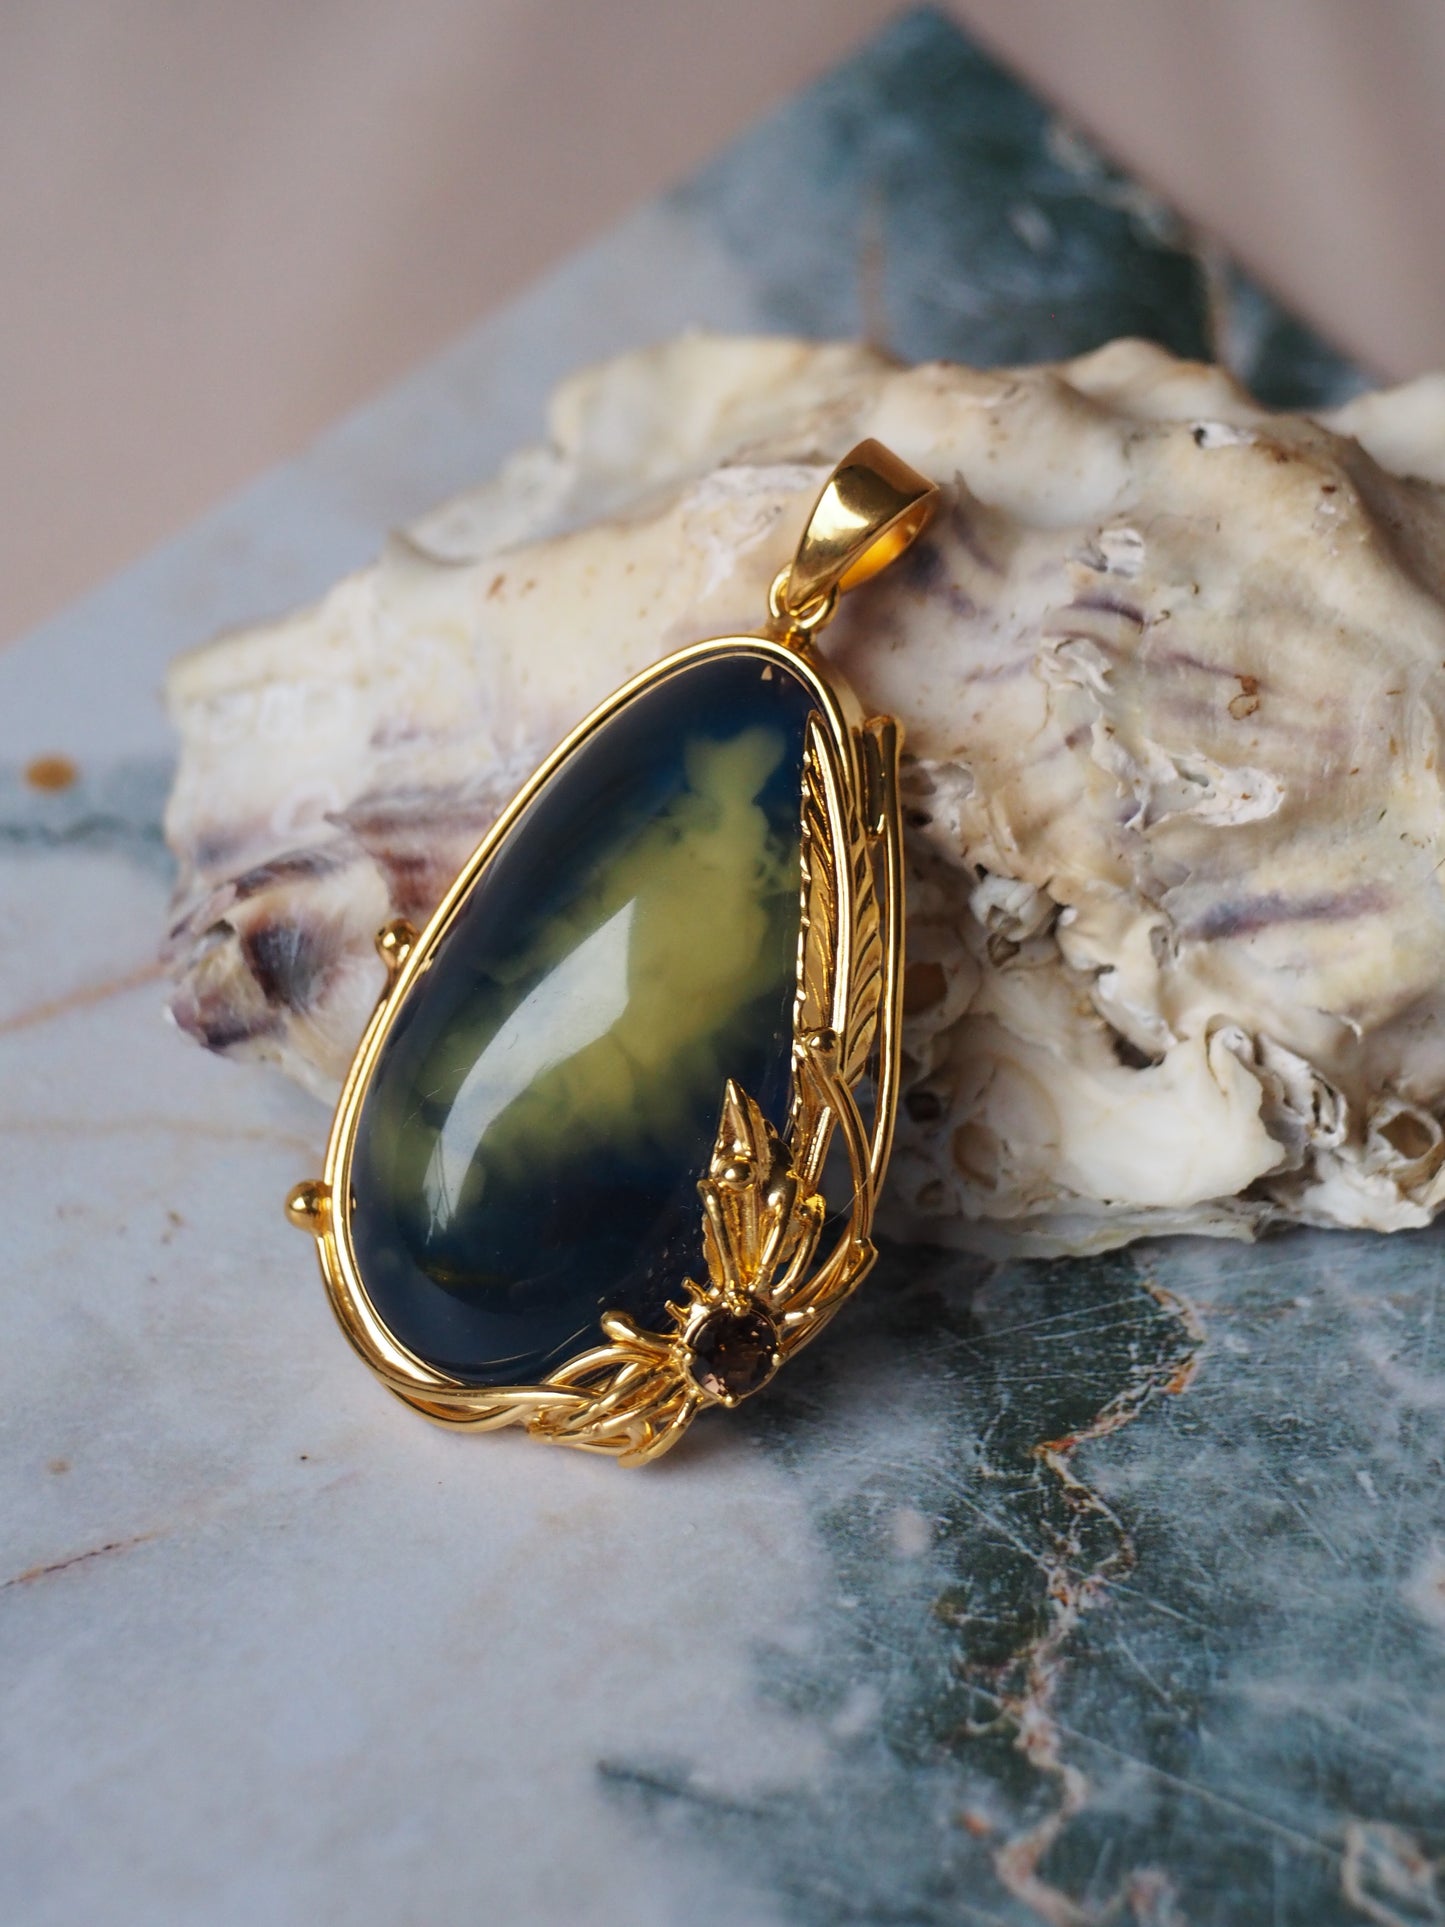 Unique Blue Amber Pendant with Milk Inclusion and Amethyst in Gold Plated Silver